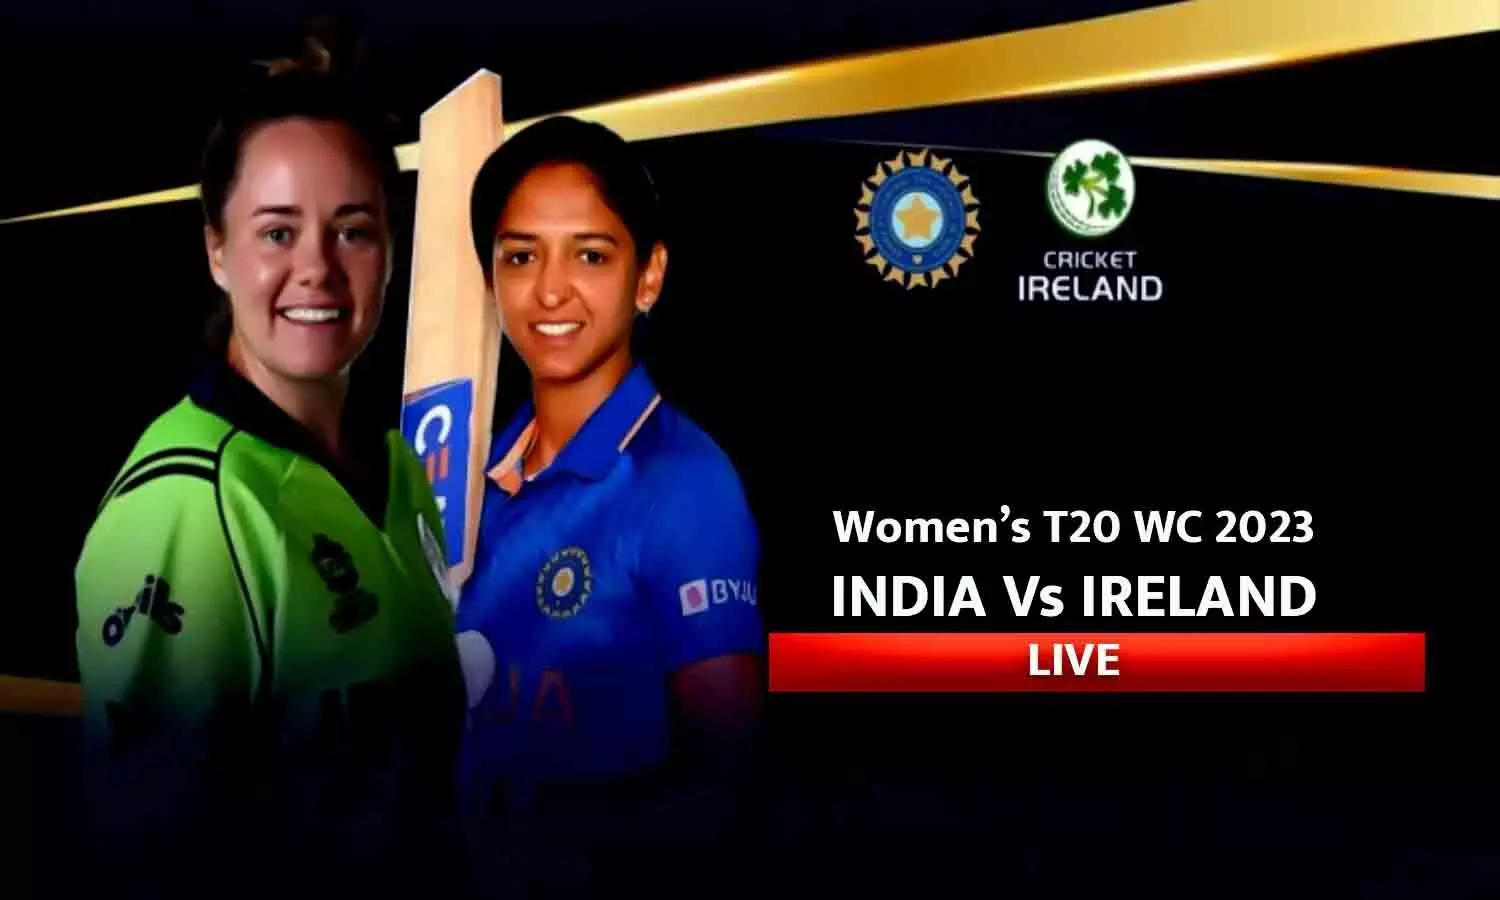 IND-W vs IRE-W T20 WC LIVE